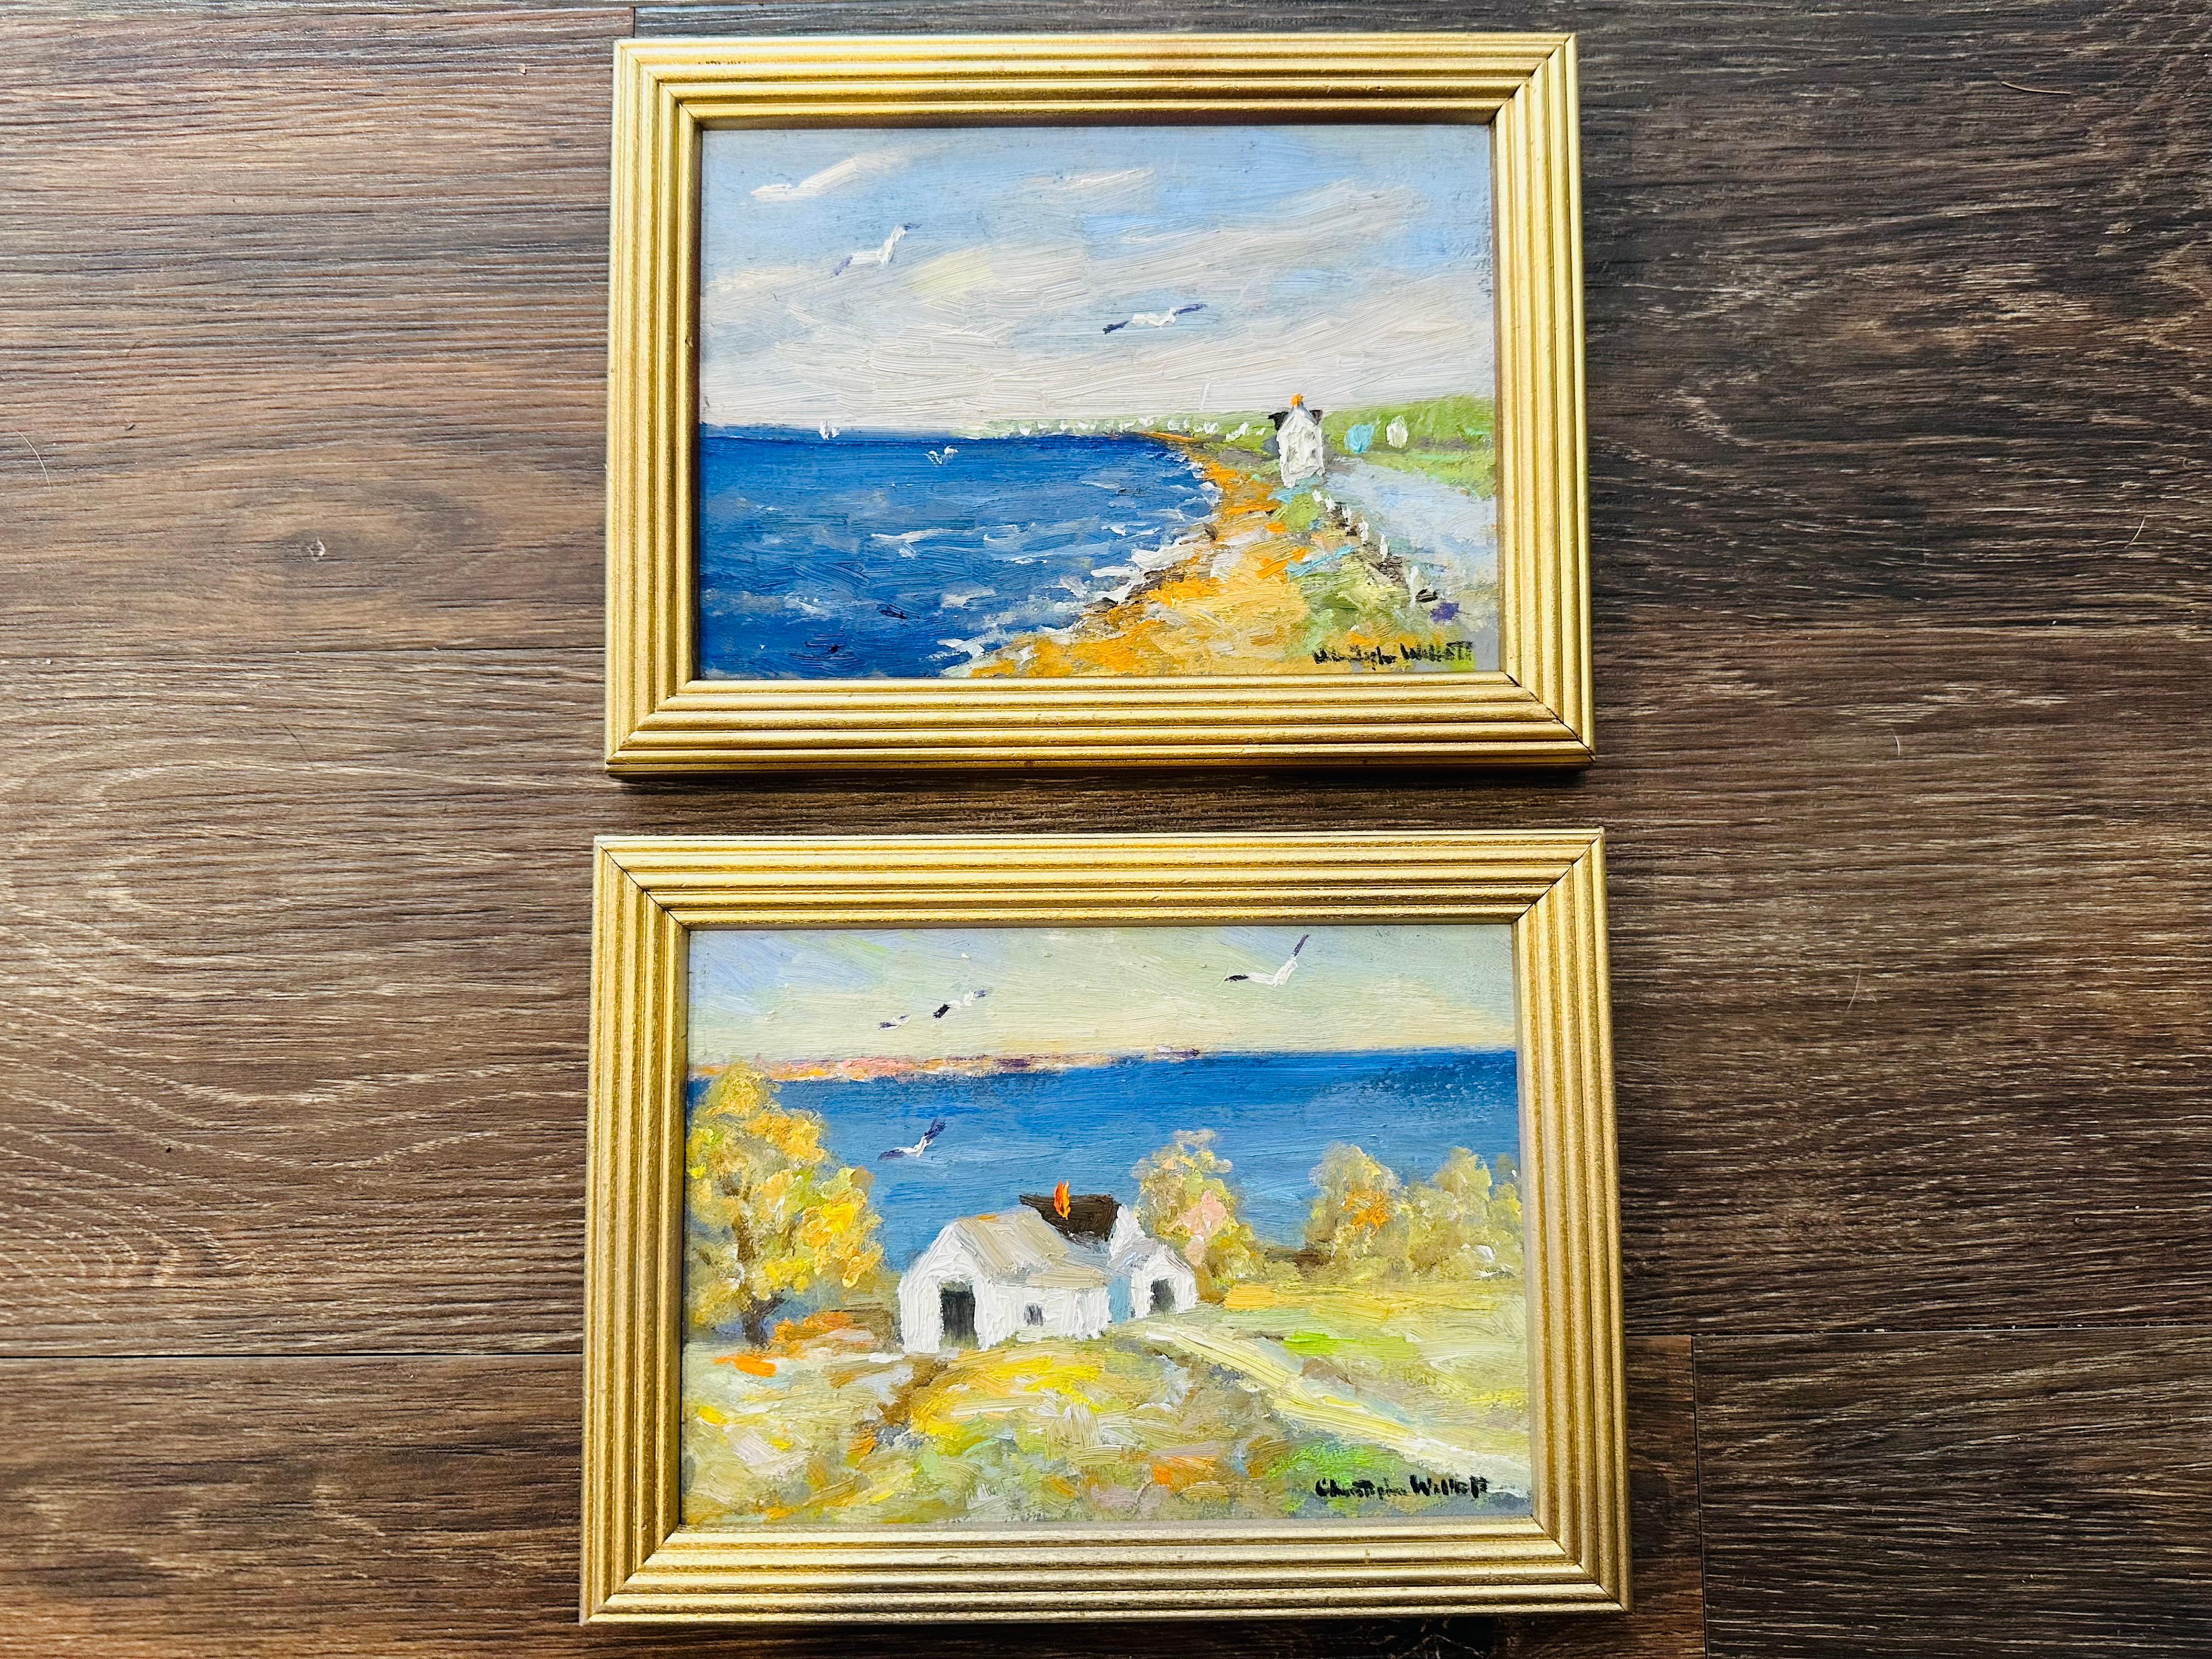 Impressionist Provincetown Massachusetts - A blissful summer afternoon in Provincetown. Seagulls soaring over the hill house. A quaint white house overlooking the beach with the waves crashing below. Enjoy two different views of this picturesque